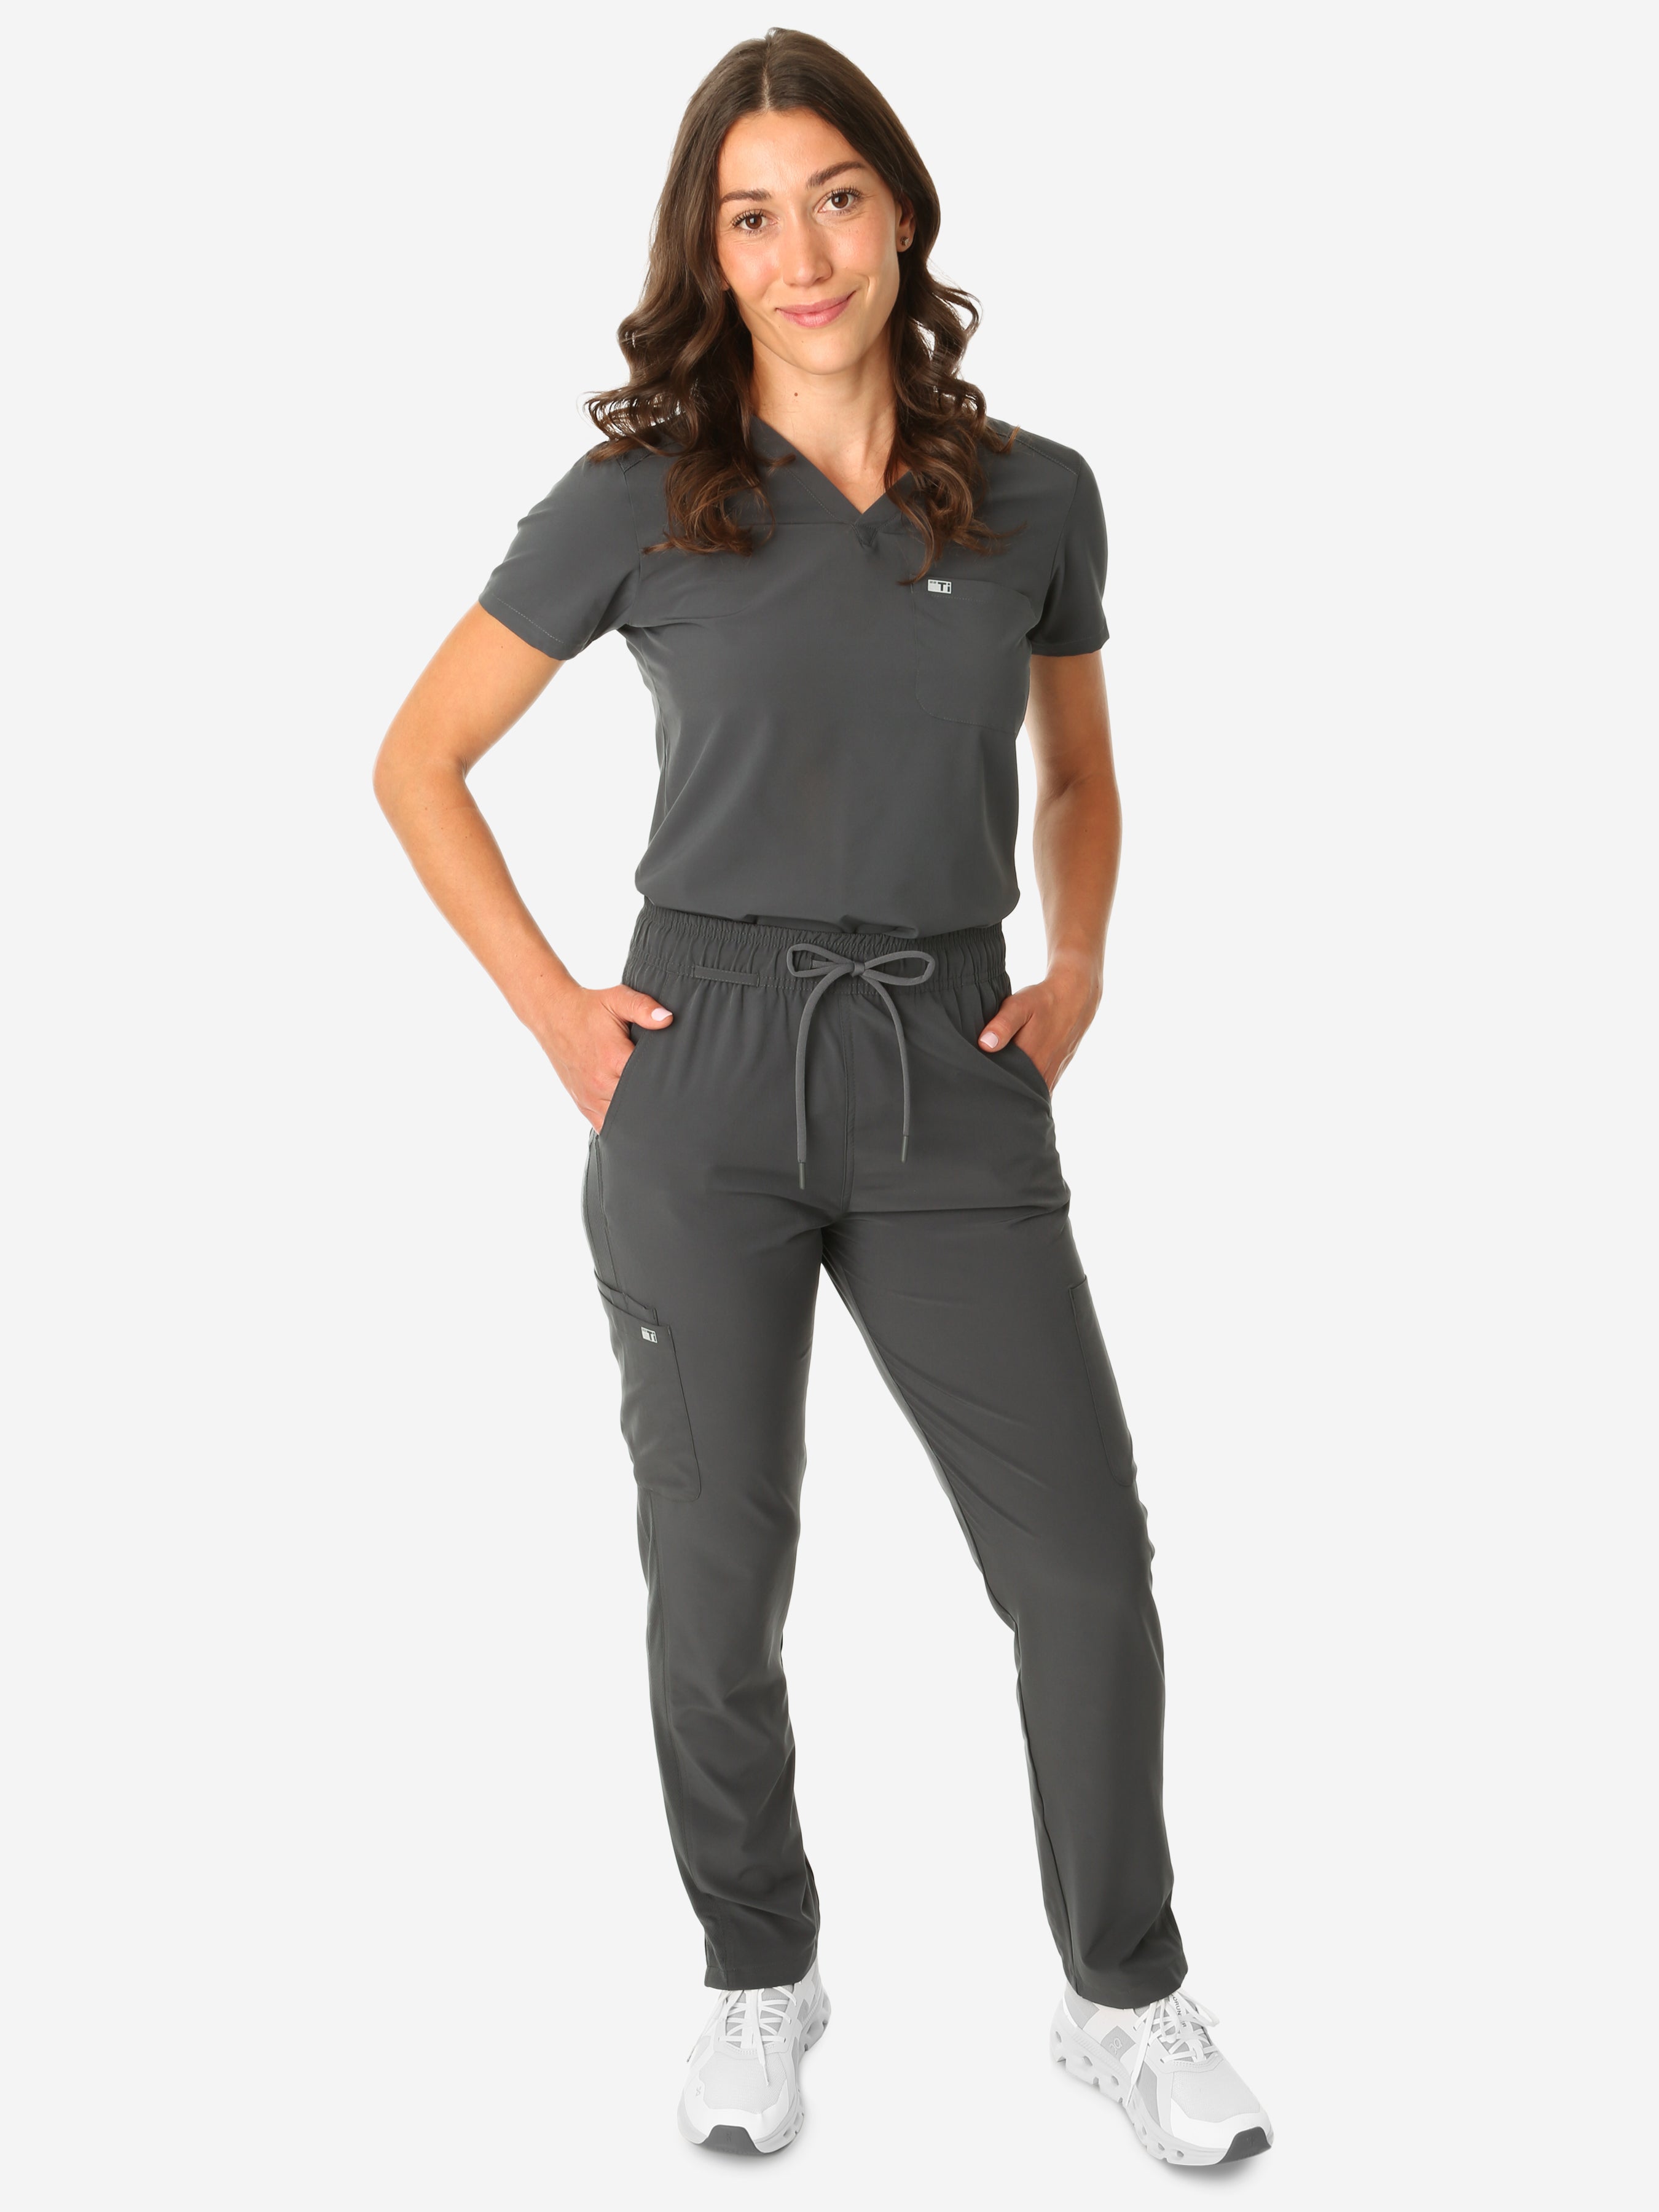 TiScrubs Charcoal Gray Women&#39;s Stretch 9-Pocket Pants and One-Pocket Tuckable Top Front View Full Body